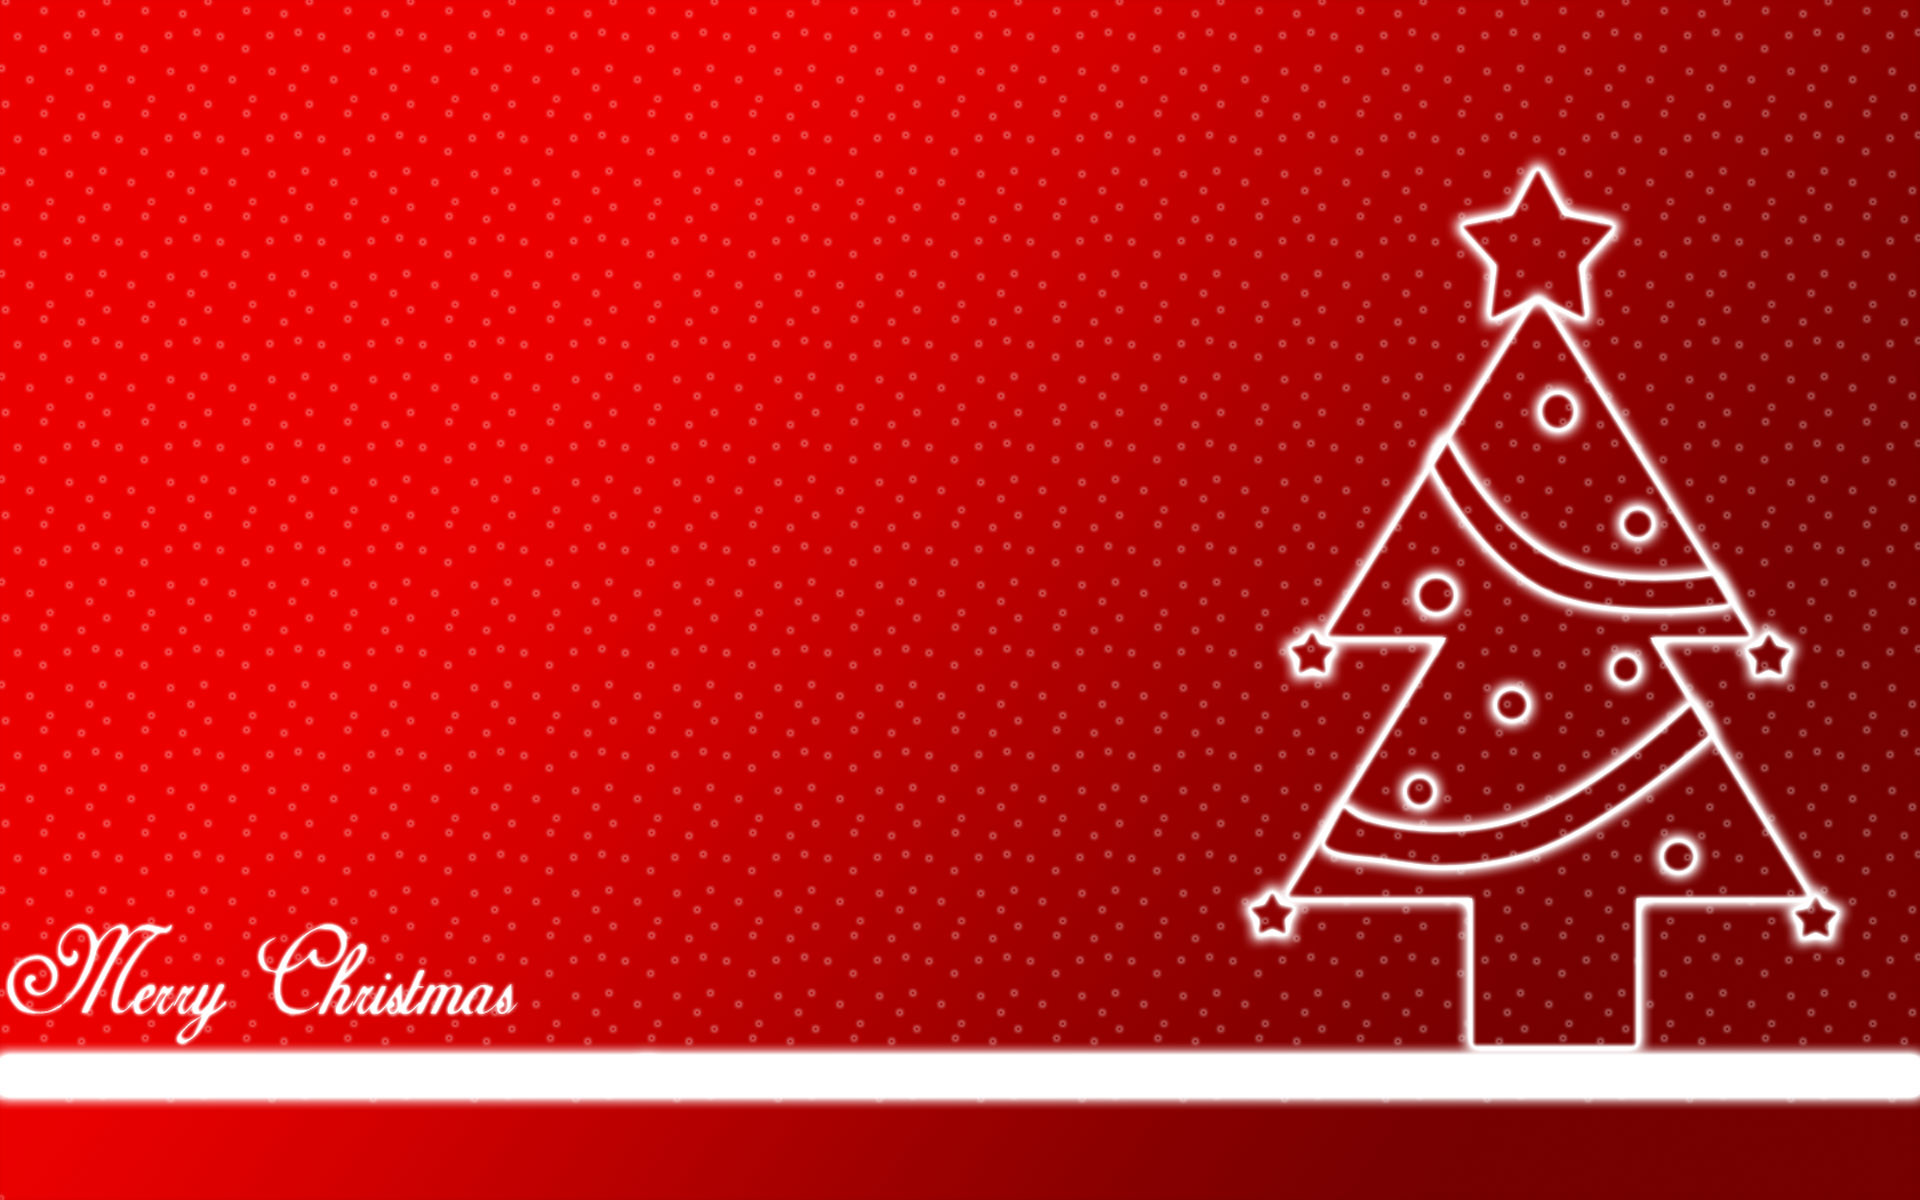 1920x1200 merry christmas background